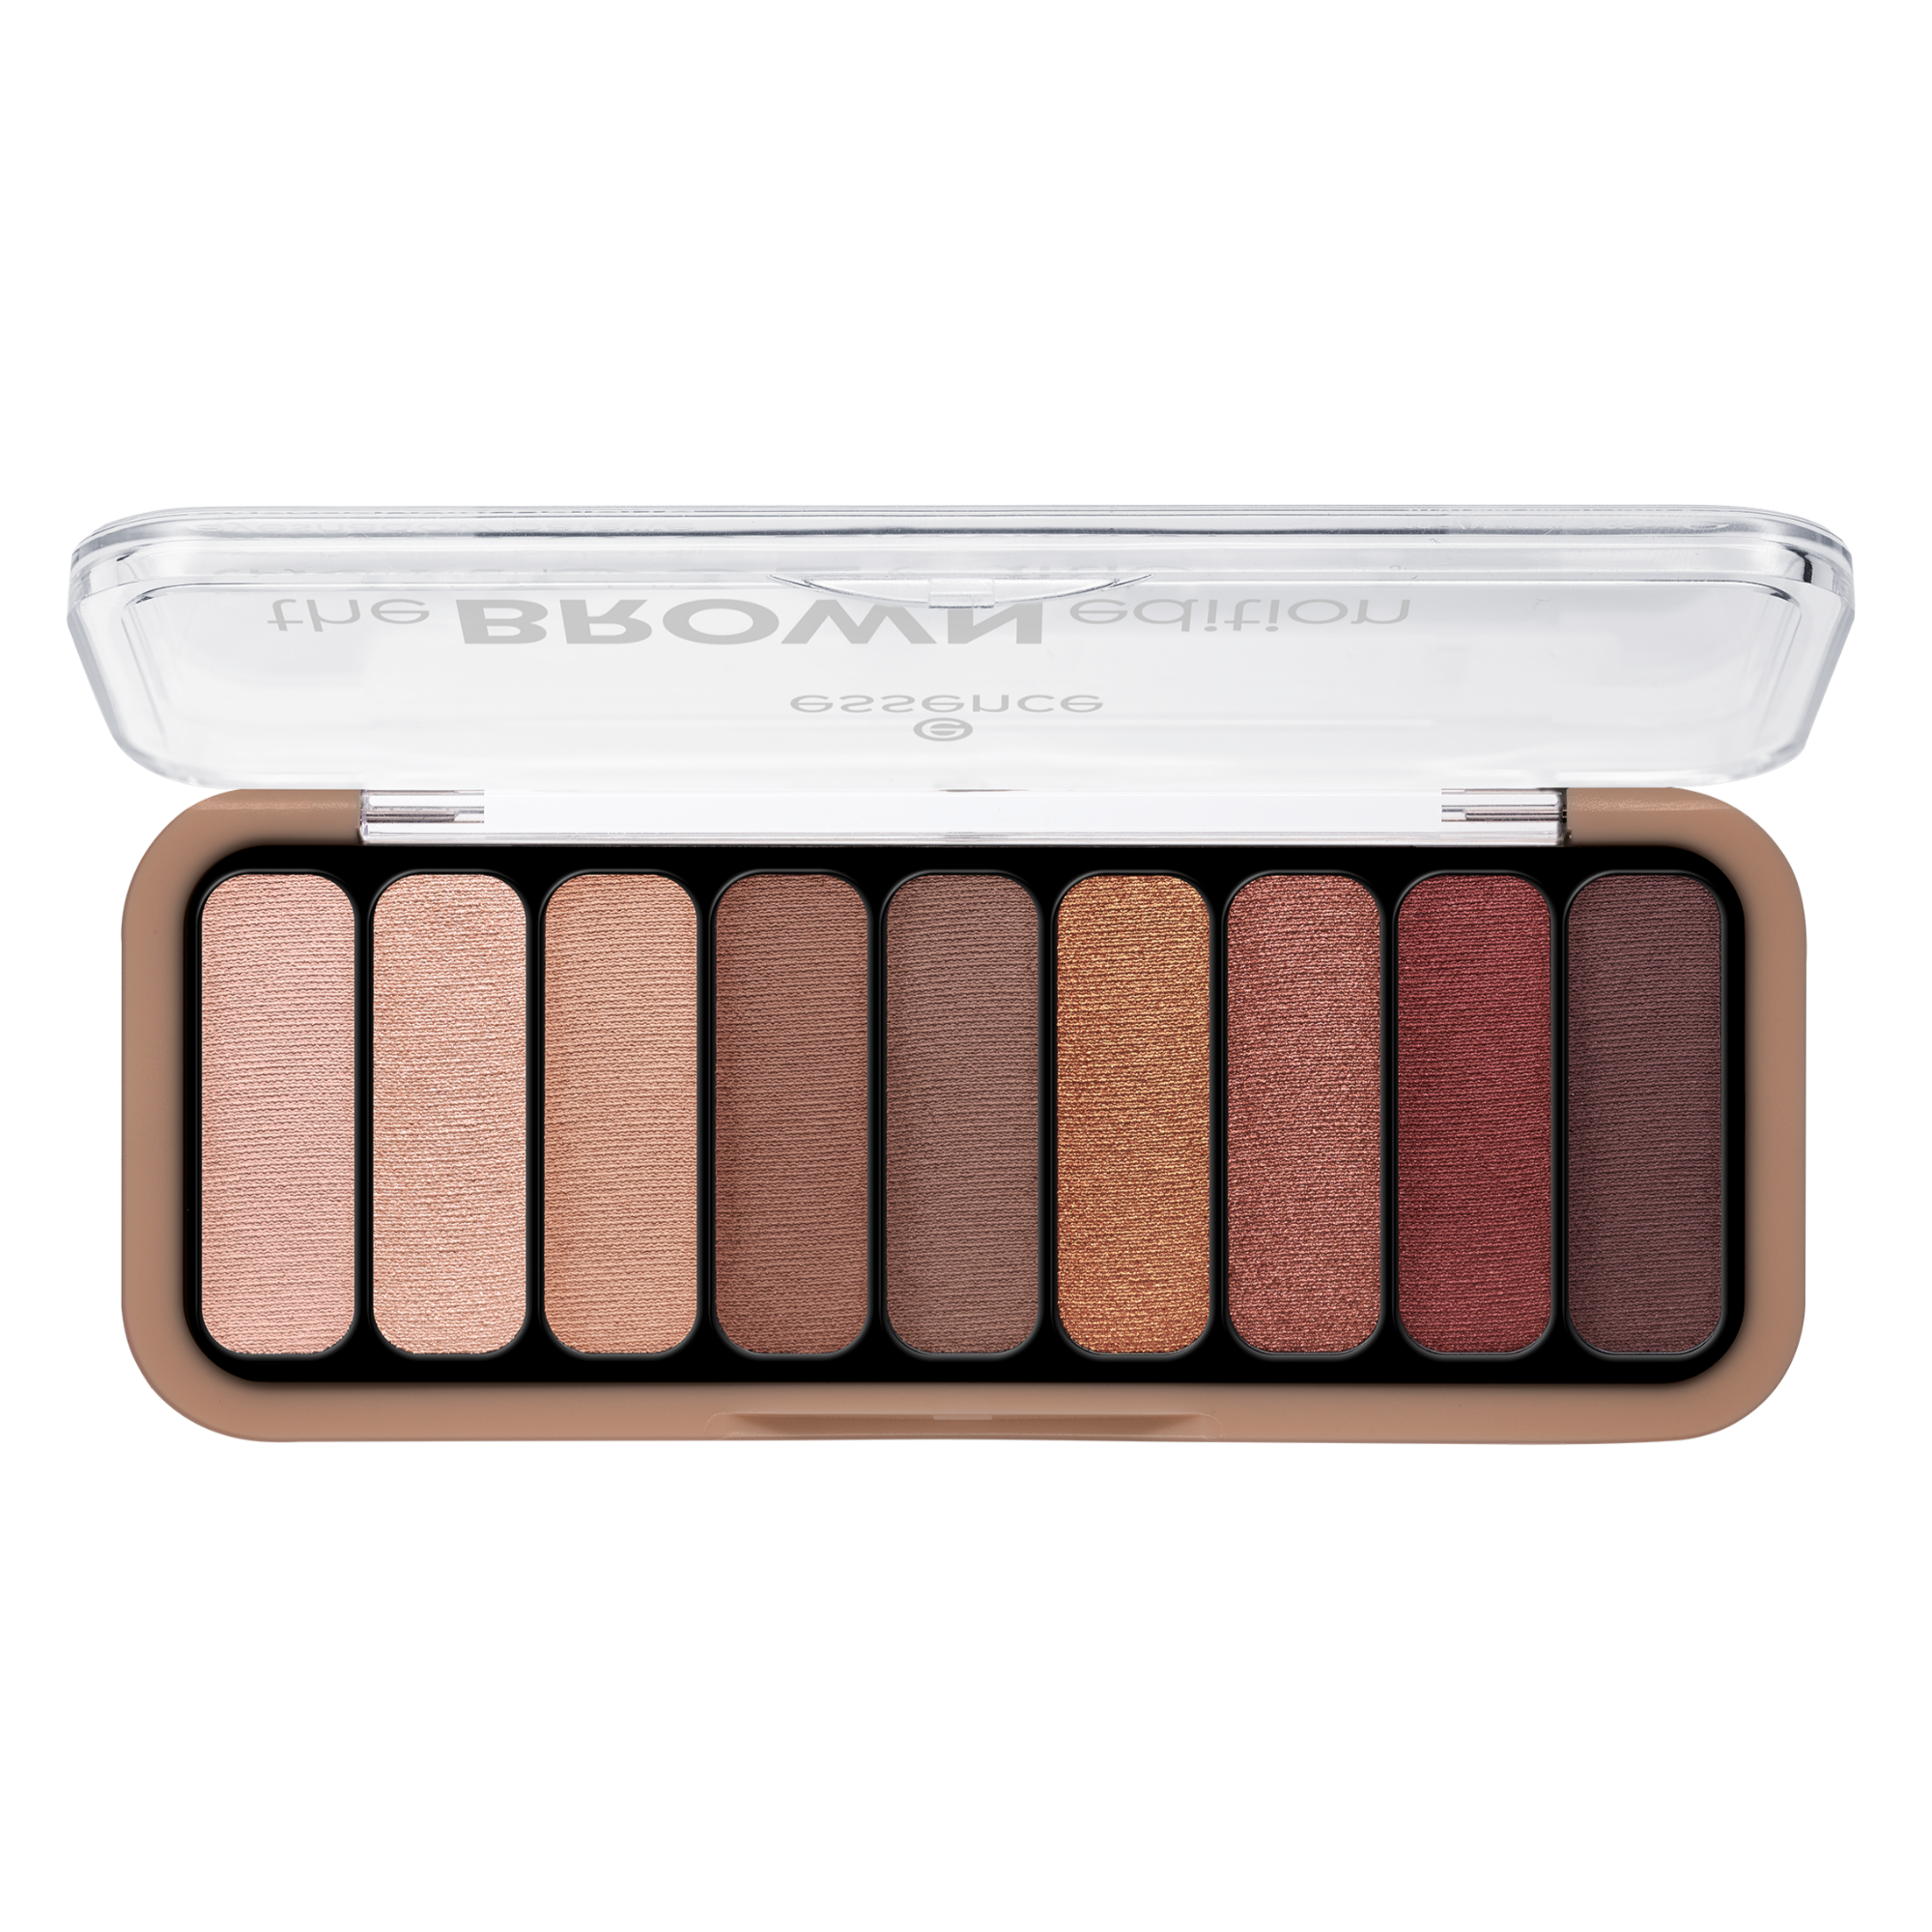 the BROWN edition eyeshadow palette